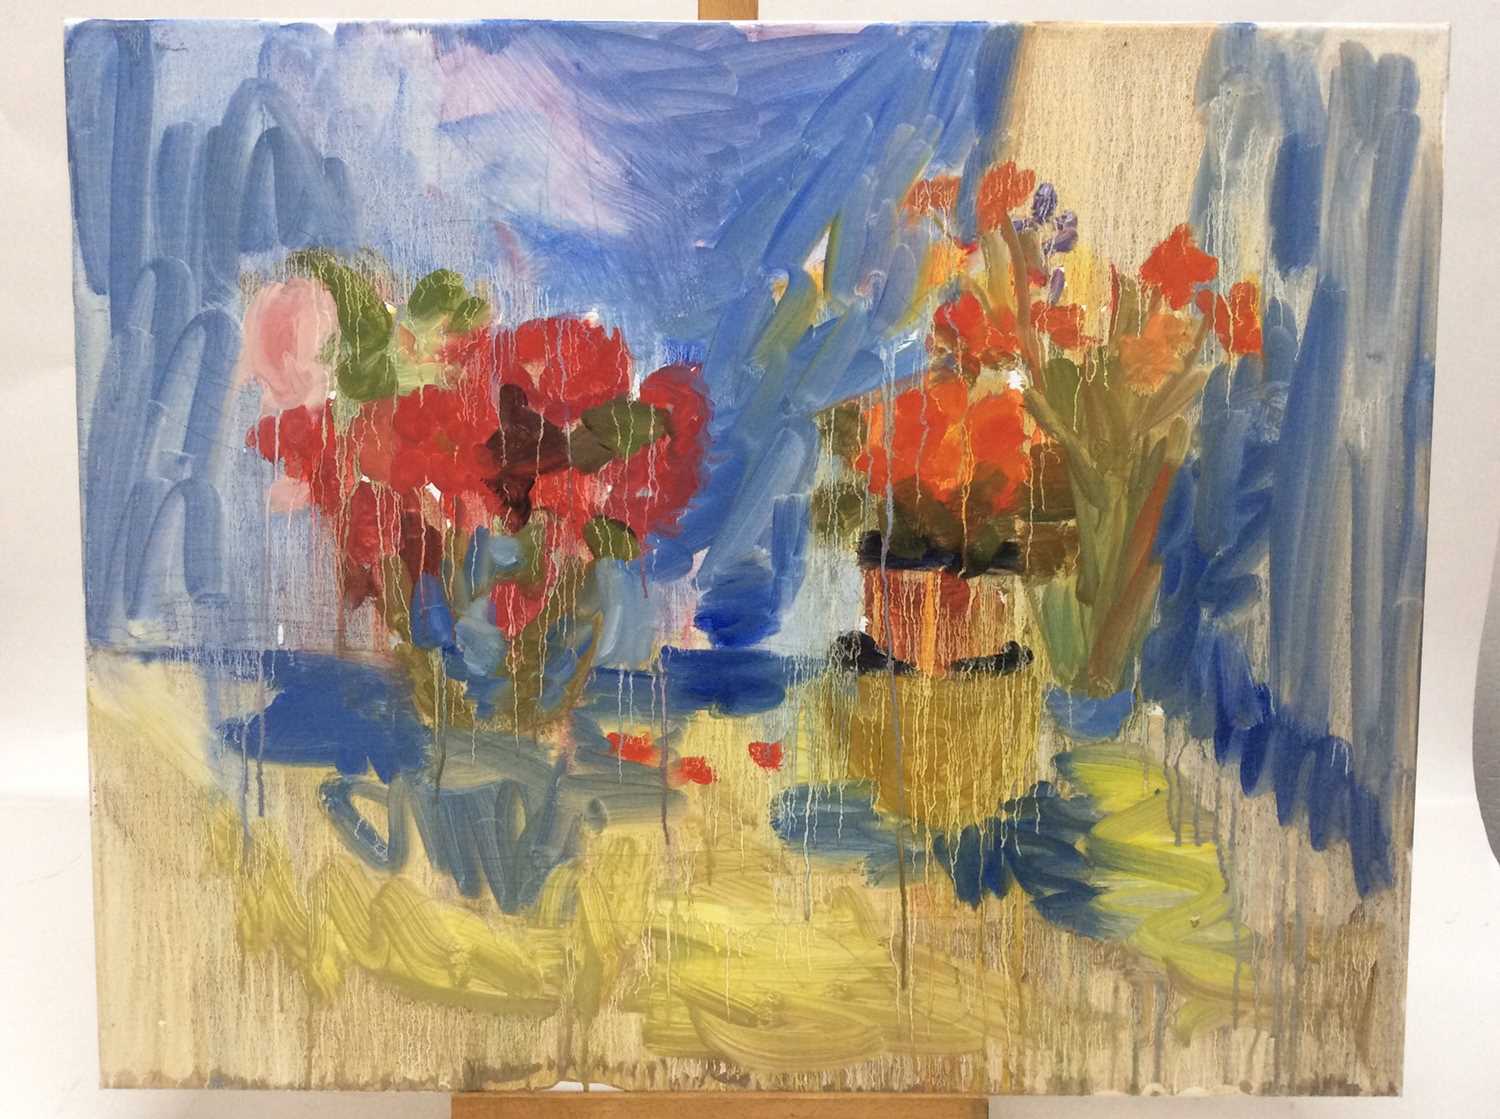 Lot 11 - Annelise Firth (b.1961) oil on canvas - Still life of flowers in vases, signed and dated verso, 61cm x 76cm